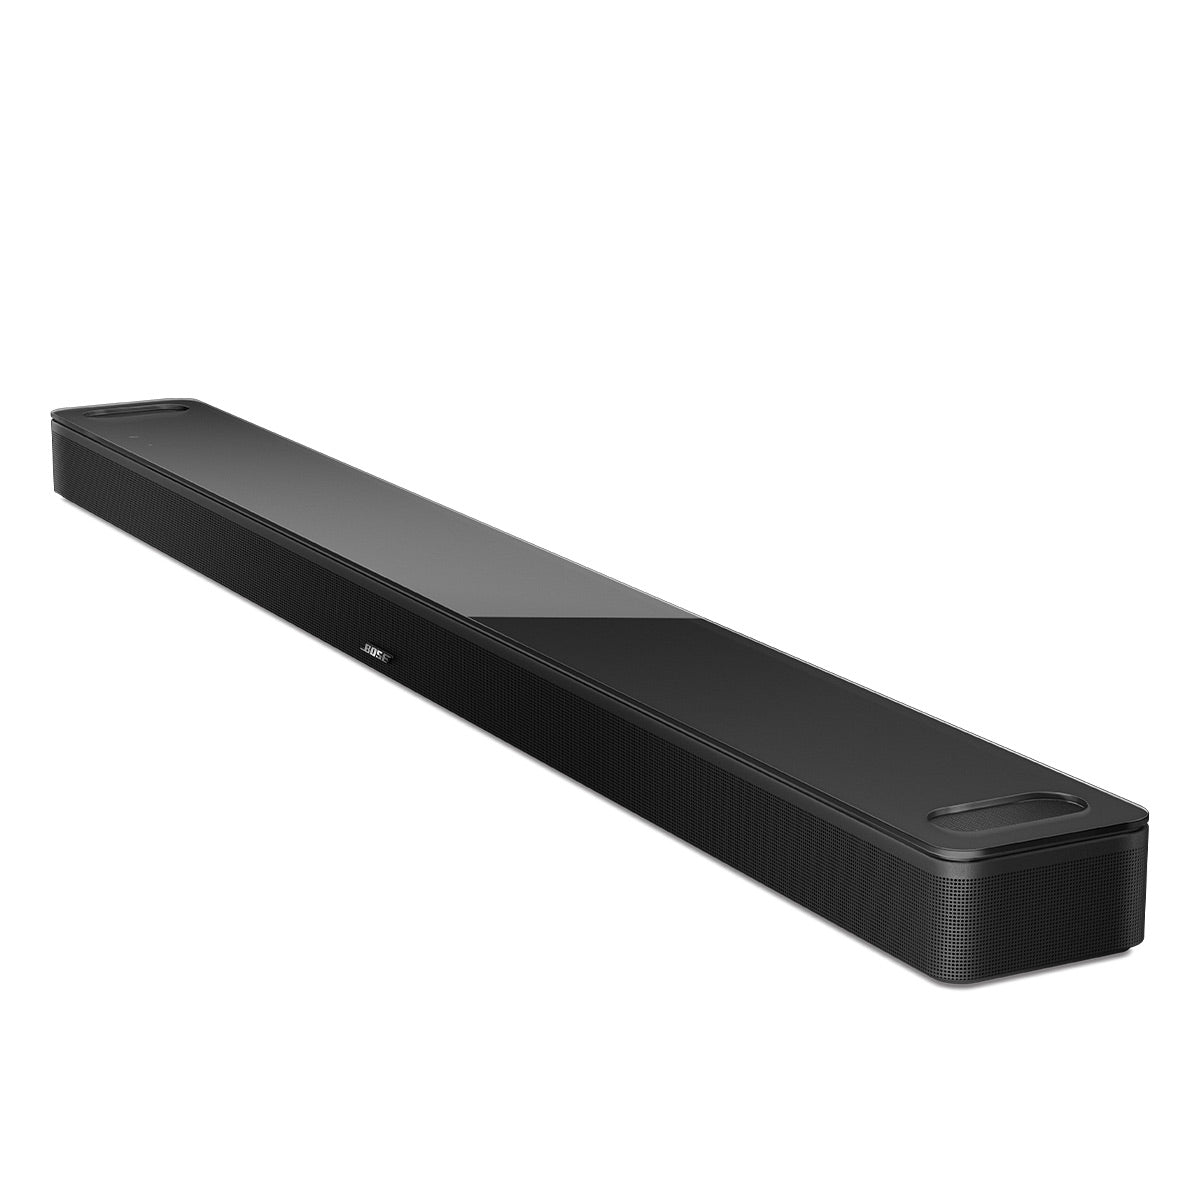 Smart | Stereo Bose Control Wide World (Black) Dolby Atmos Voice and Google Alexa Soundbar Assistant with 900